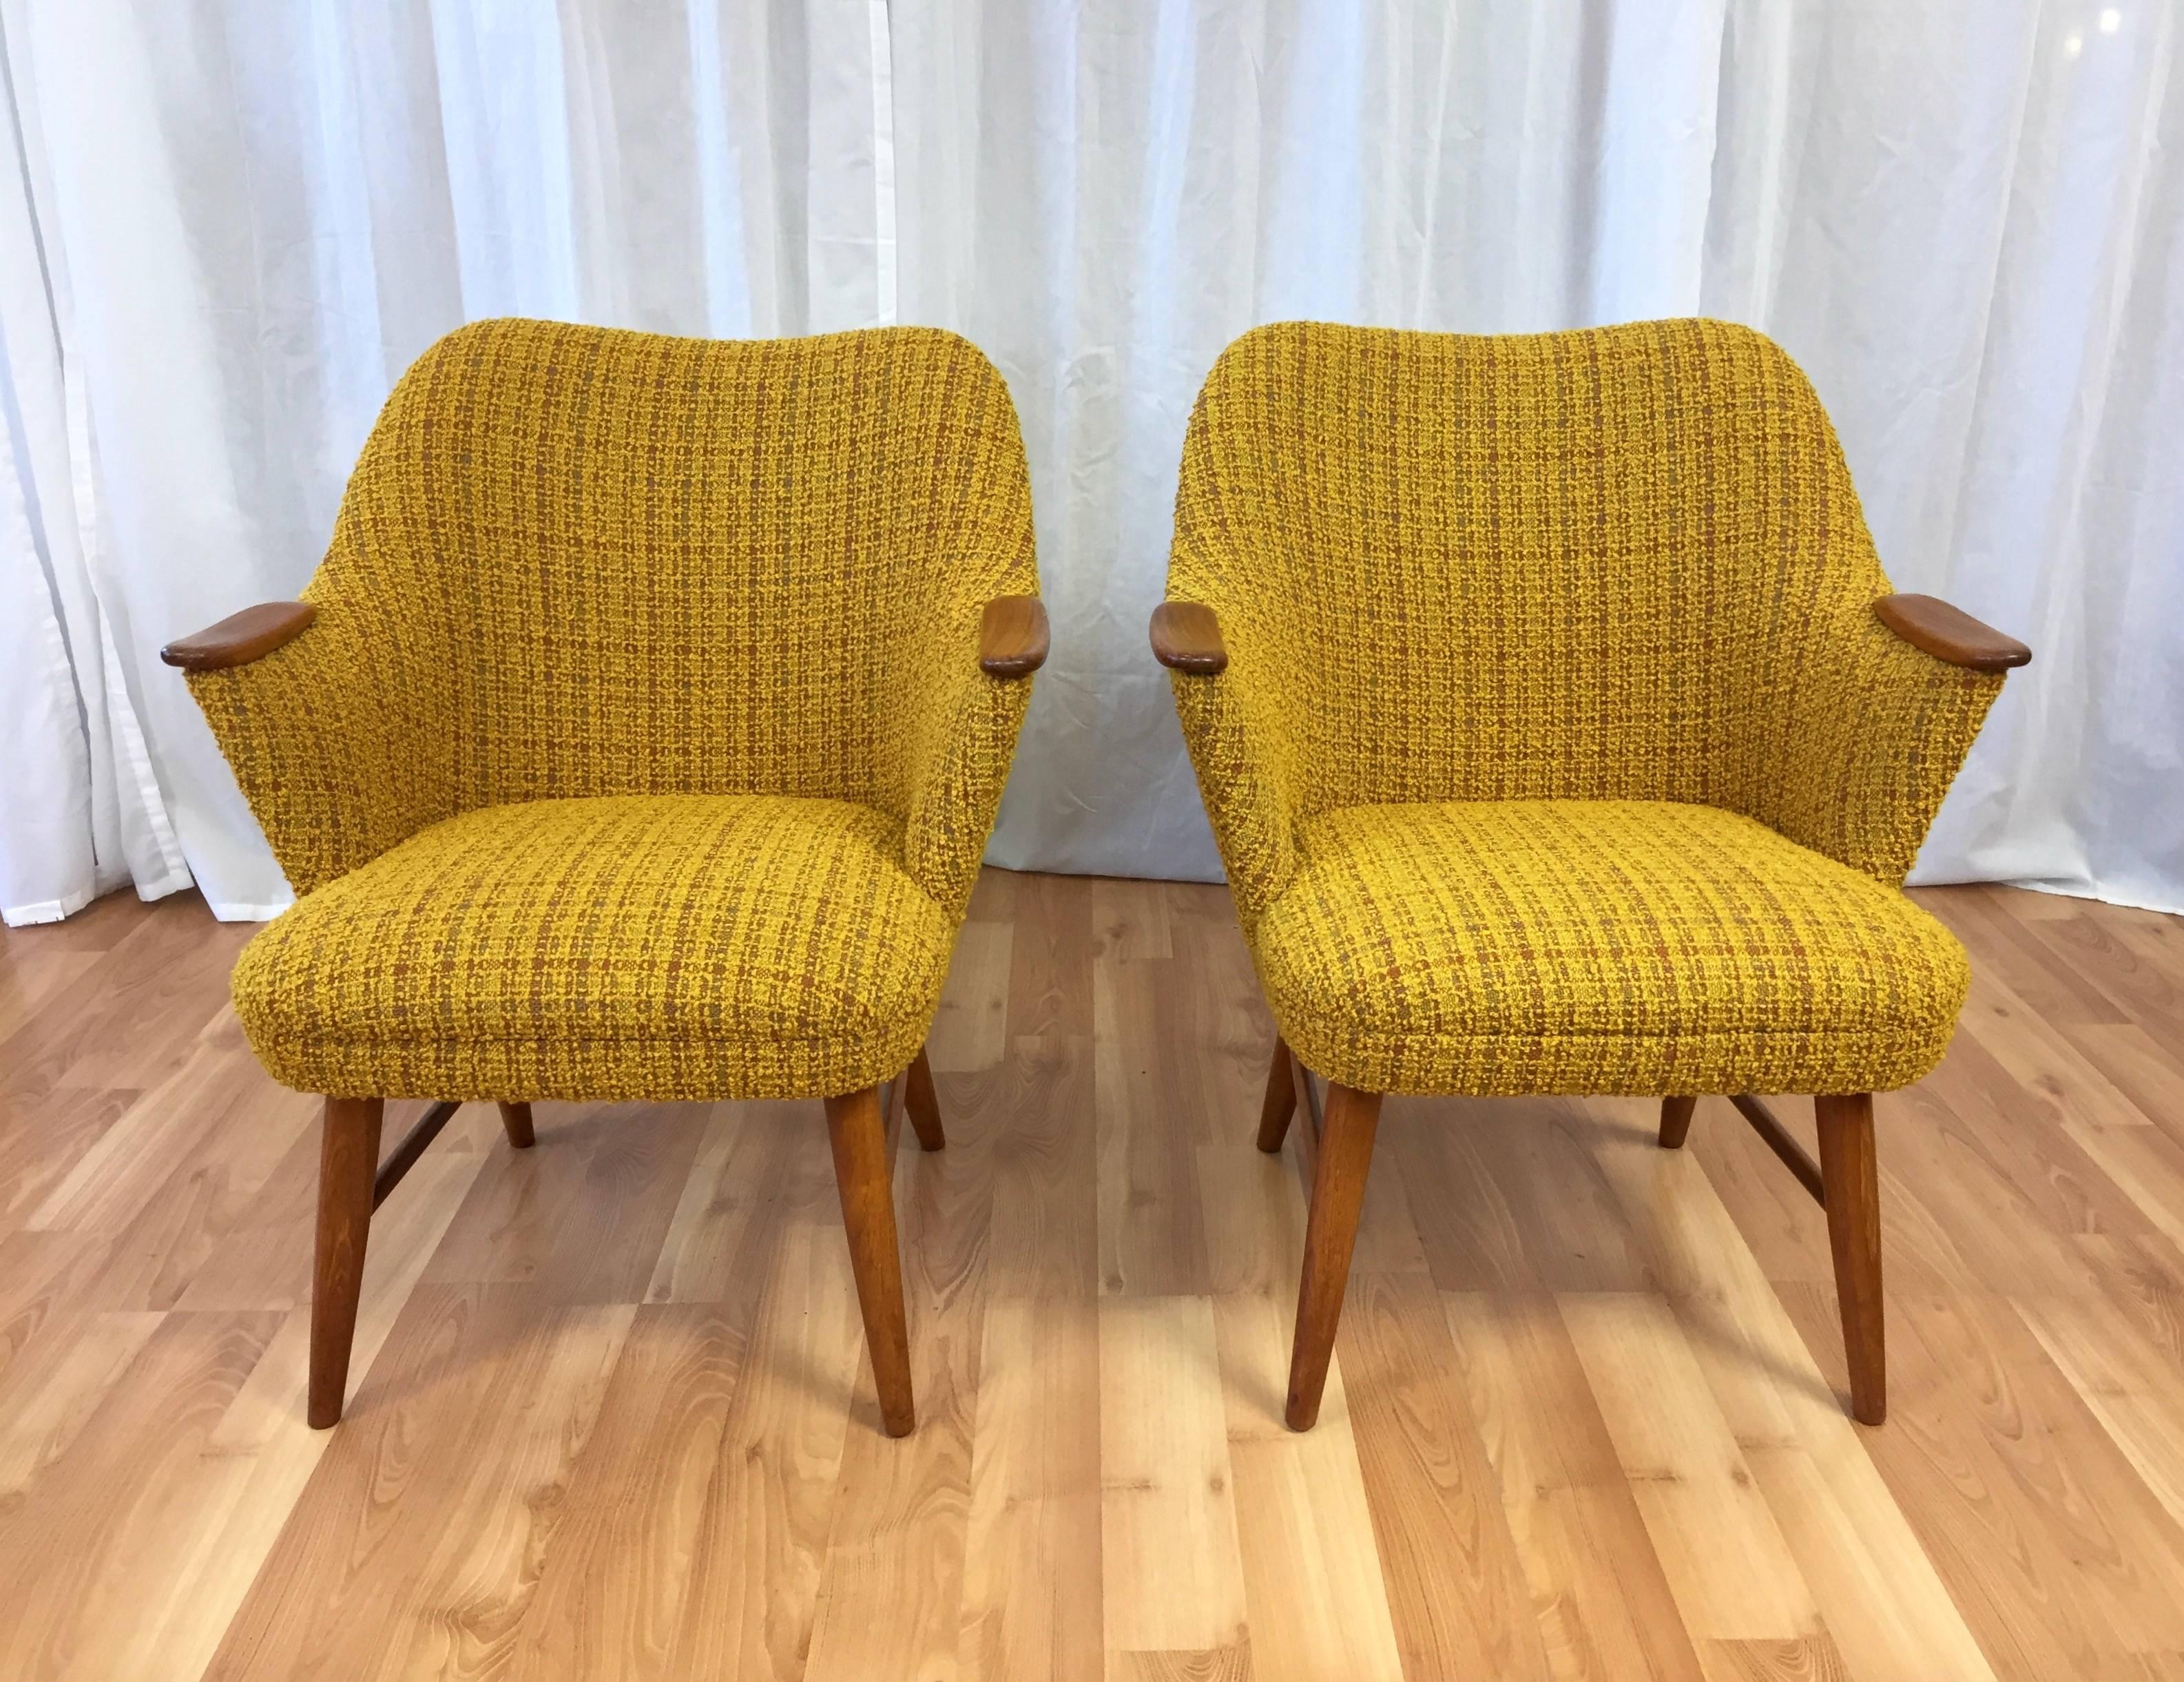 A delightful pair of smaller-scale upholstered Danish armchairs with teak accents.

Broad, nicely pitched seat backs flow into arms topped with hand-carved teak “surfboard” accents. Sits low on solid teak dowel legs. Original wool blend bouclé́